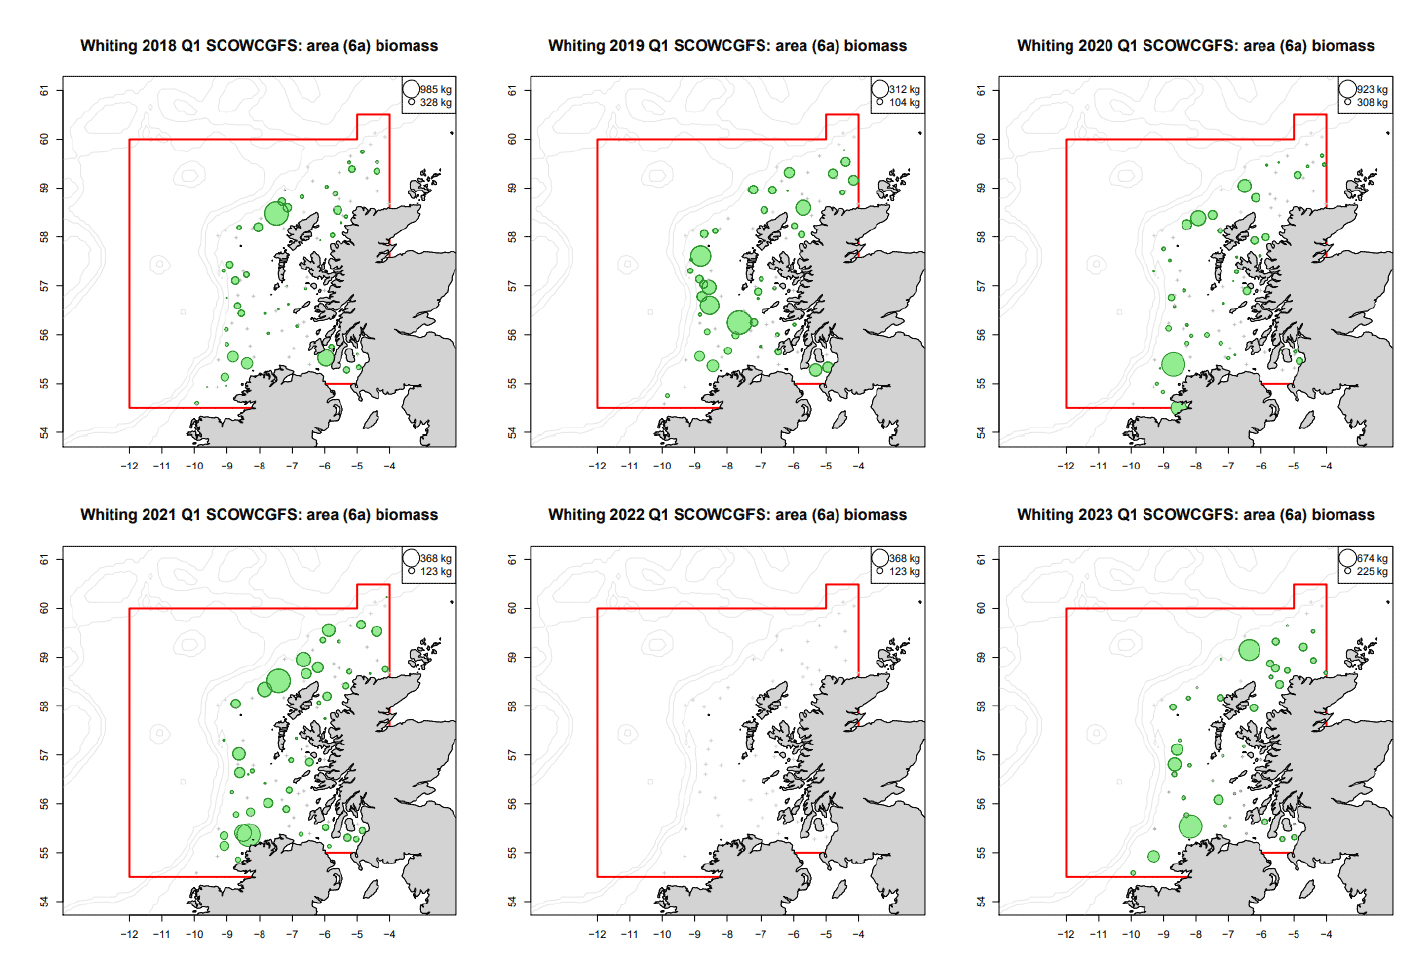 Distribution map for survey whiting biomass in Quarter 1 in the West of Scotland (area 6a). There are 6 bubble plots one per year (2018-2023). The plots indicate larger biomass bubbles more or less evenly distributed throughout area 6a. There are no bubbles in 2022 when the survey was cancelled.